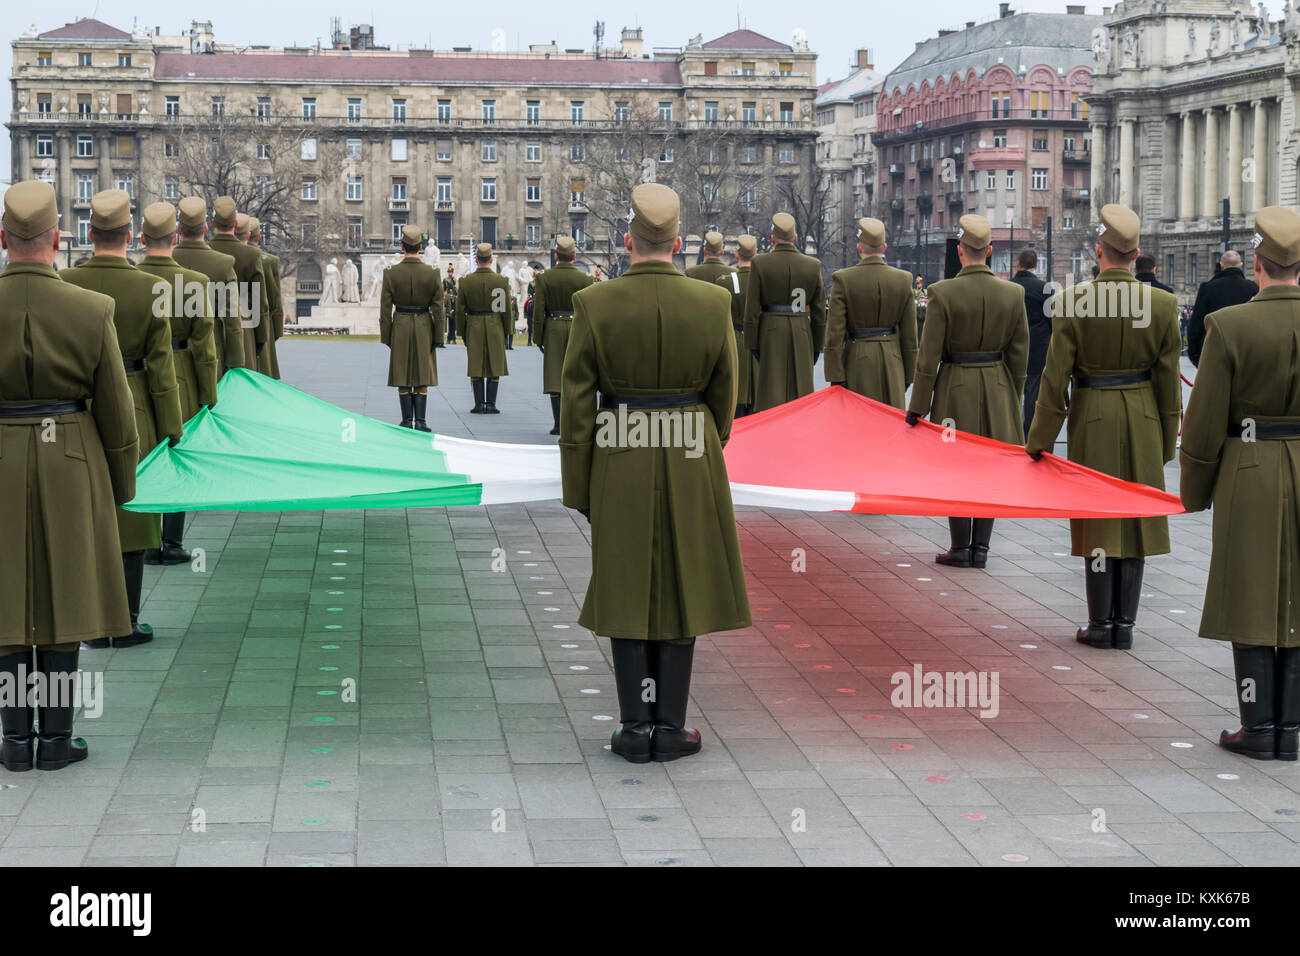 Formation of soldiers with the Hungarian flag during the 15 March military parade, Budapest, Hungary. Hungarian National Holiday. Stock Photo